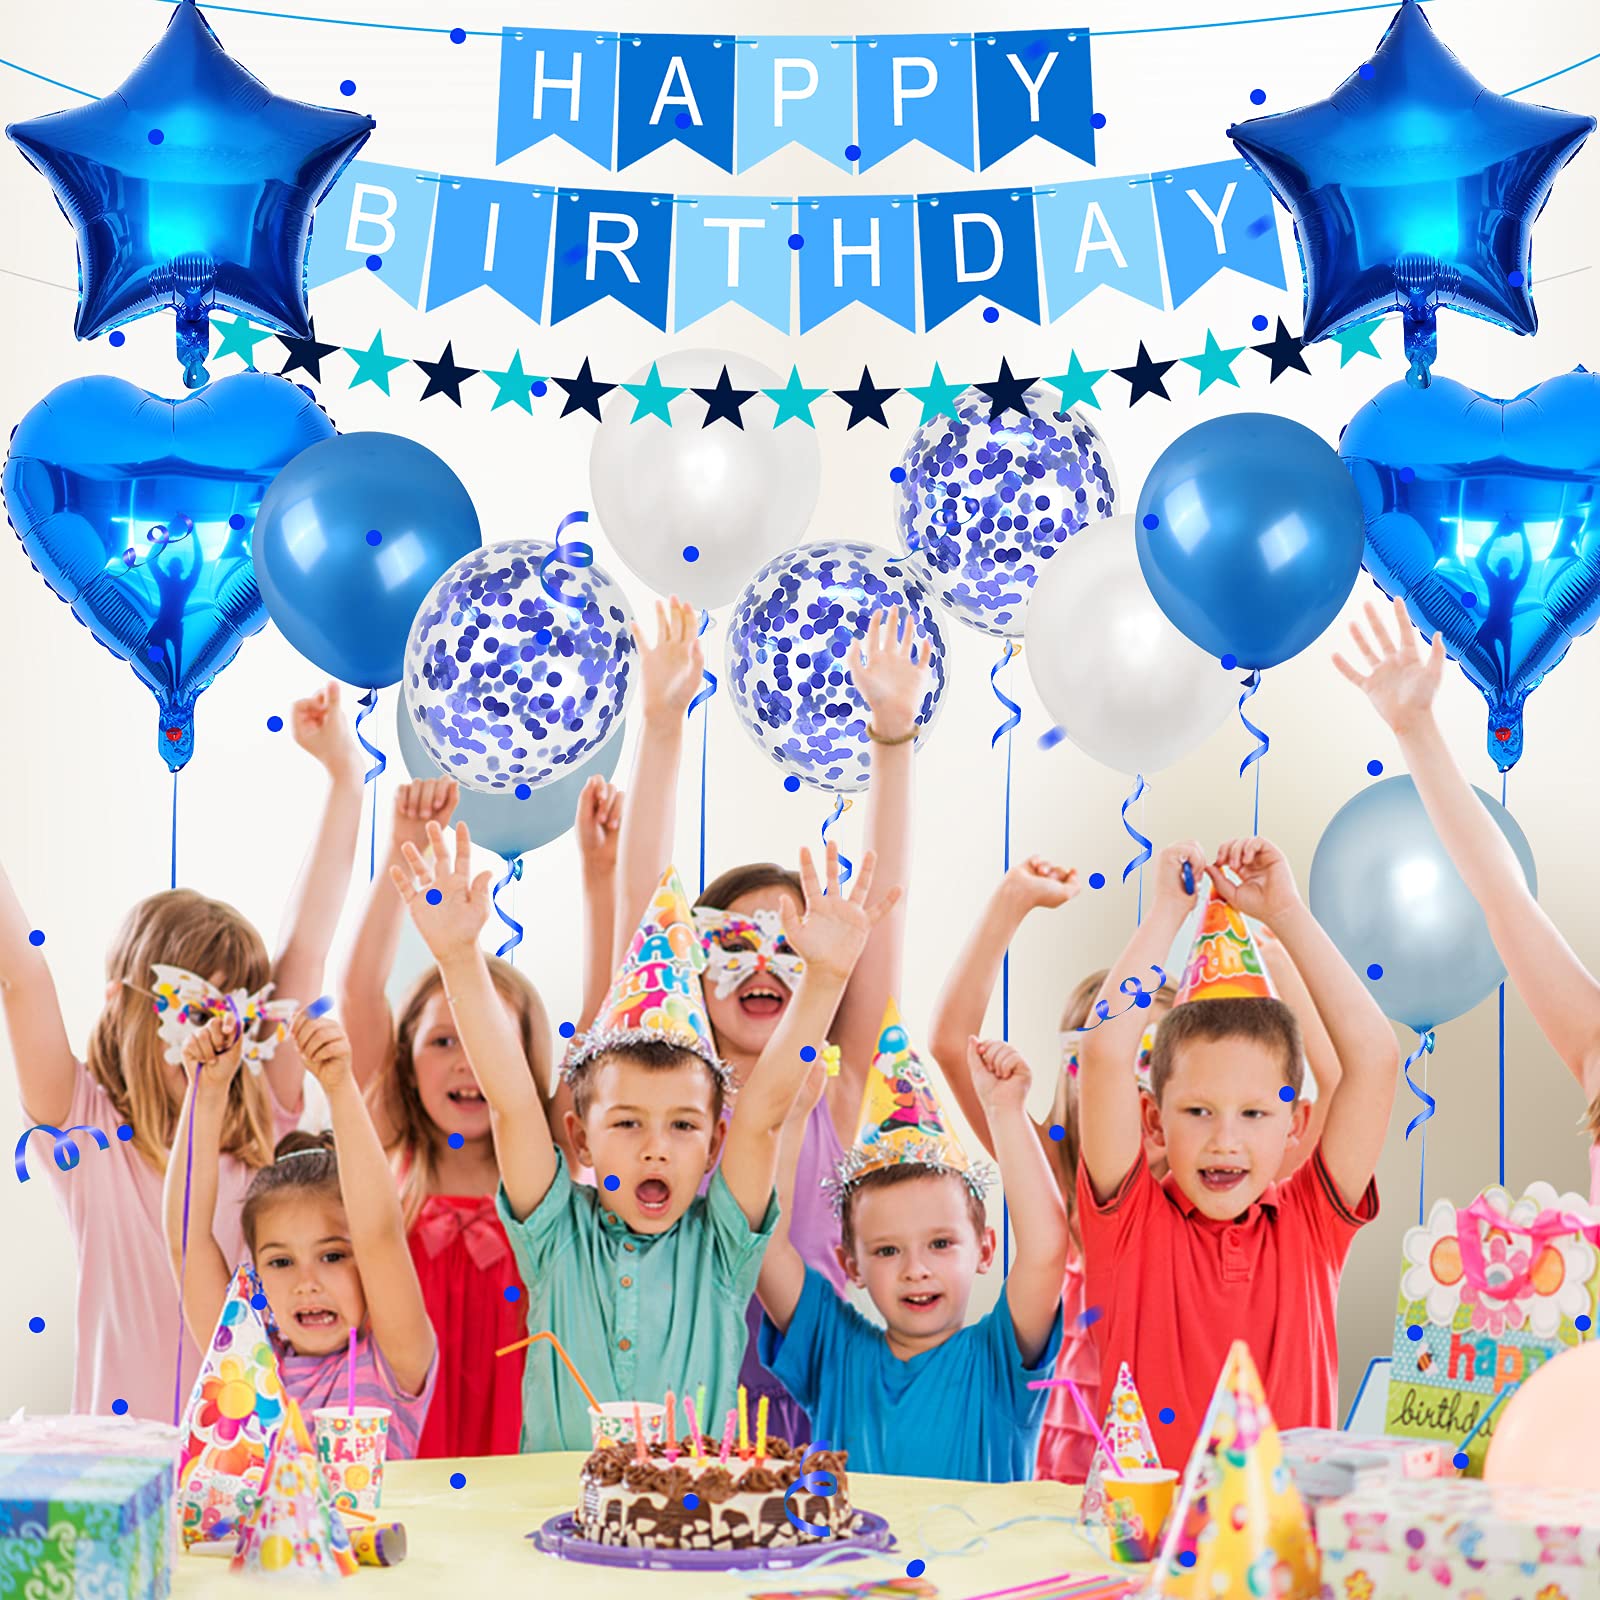 Unisun 7th Birthday Decorations for boy, 40 inch Helium Foil Balloon Number 7 Light Blue White Confetti Latex Balloons, Happy Birthday Banner with Ribbon for 7 Year Kid Birthday Party Supplies